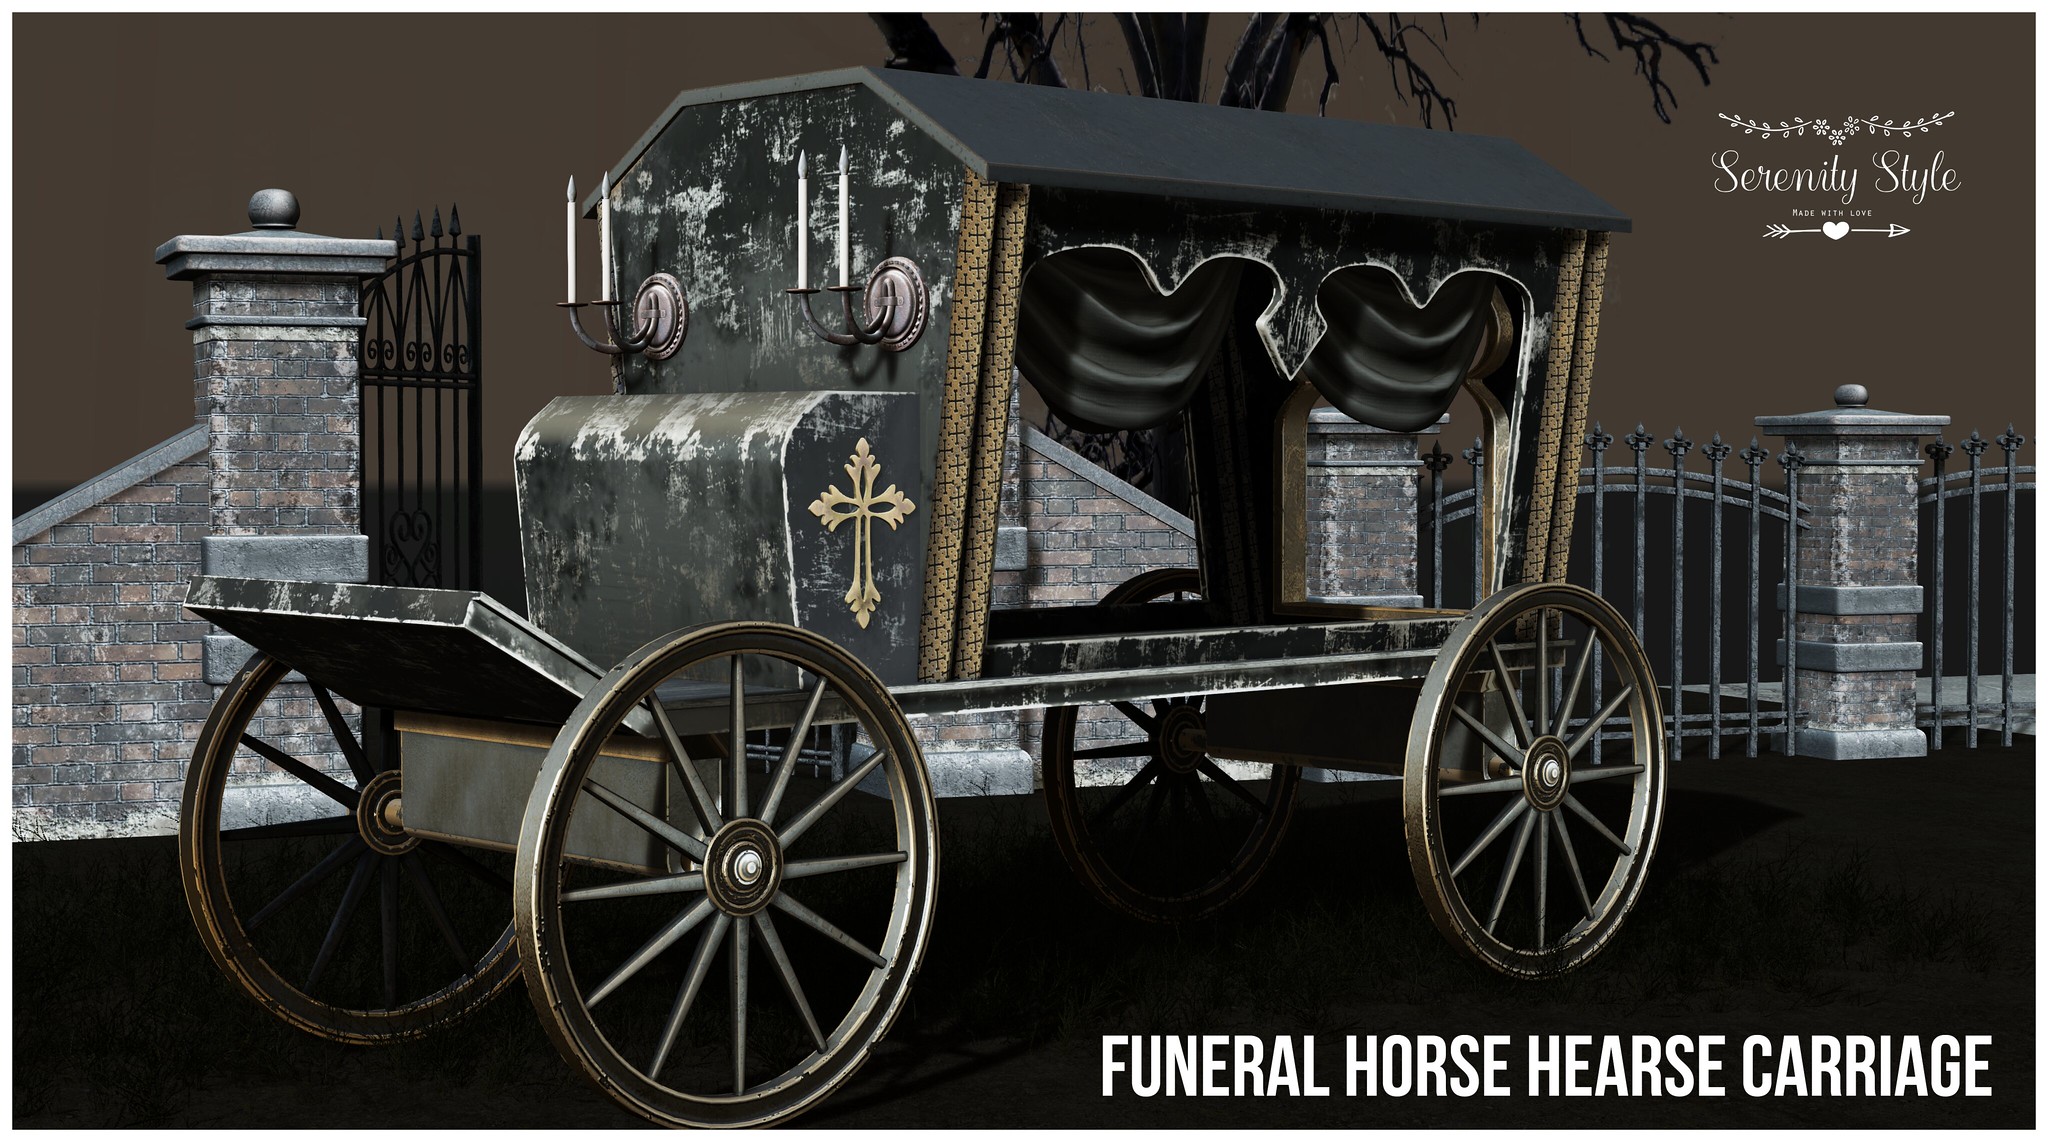 Serenity Style – Funeral Horse Hearse Carriage